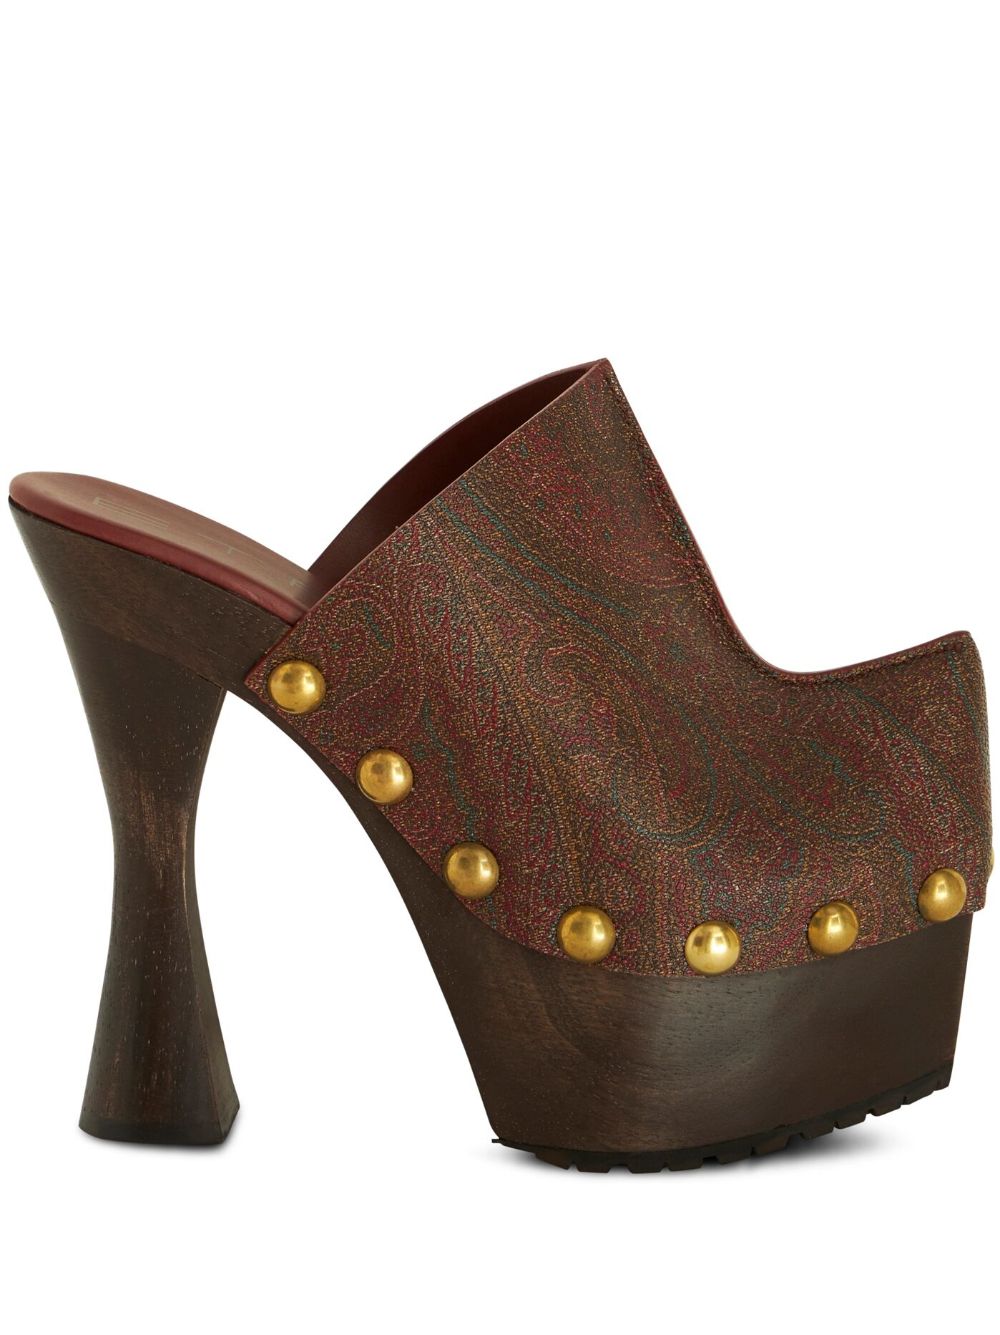 paisley-print leather clogs